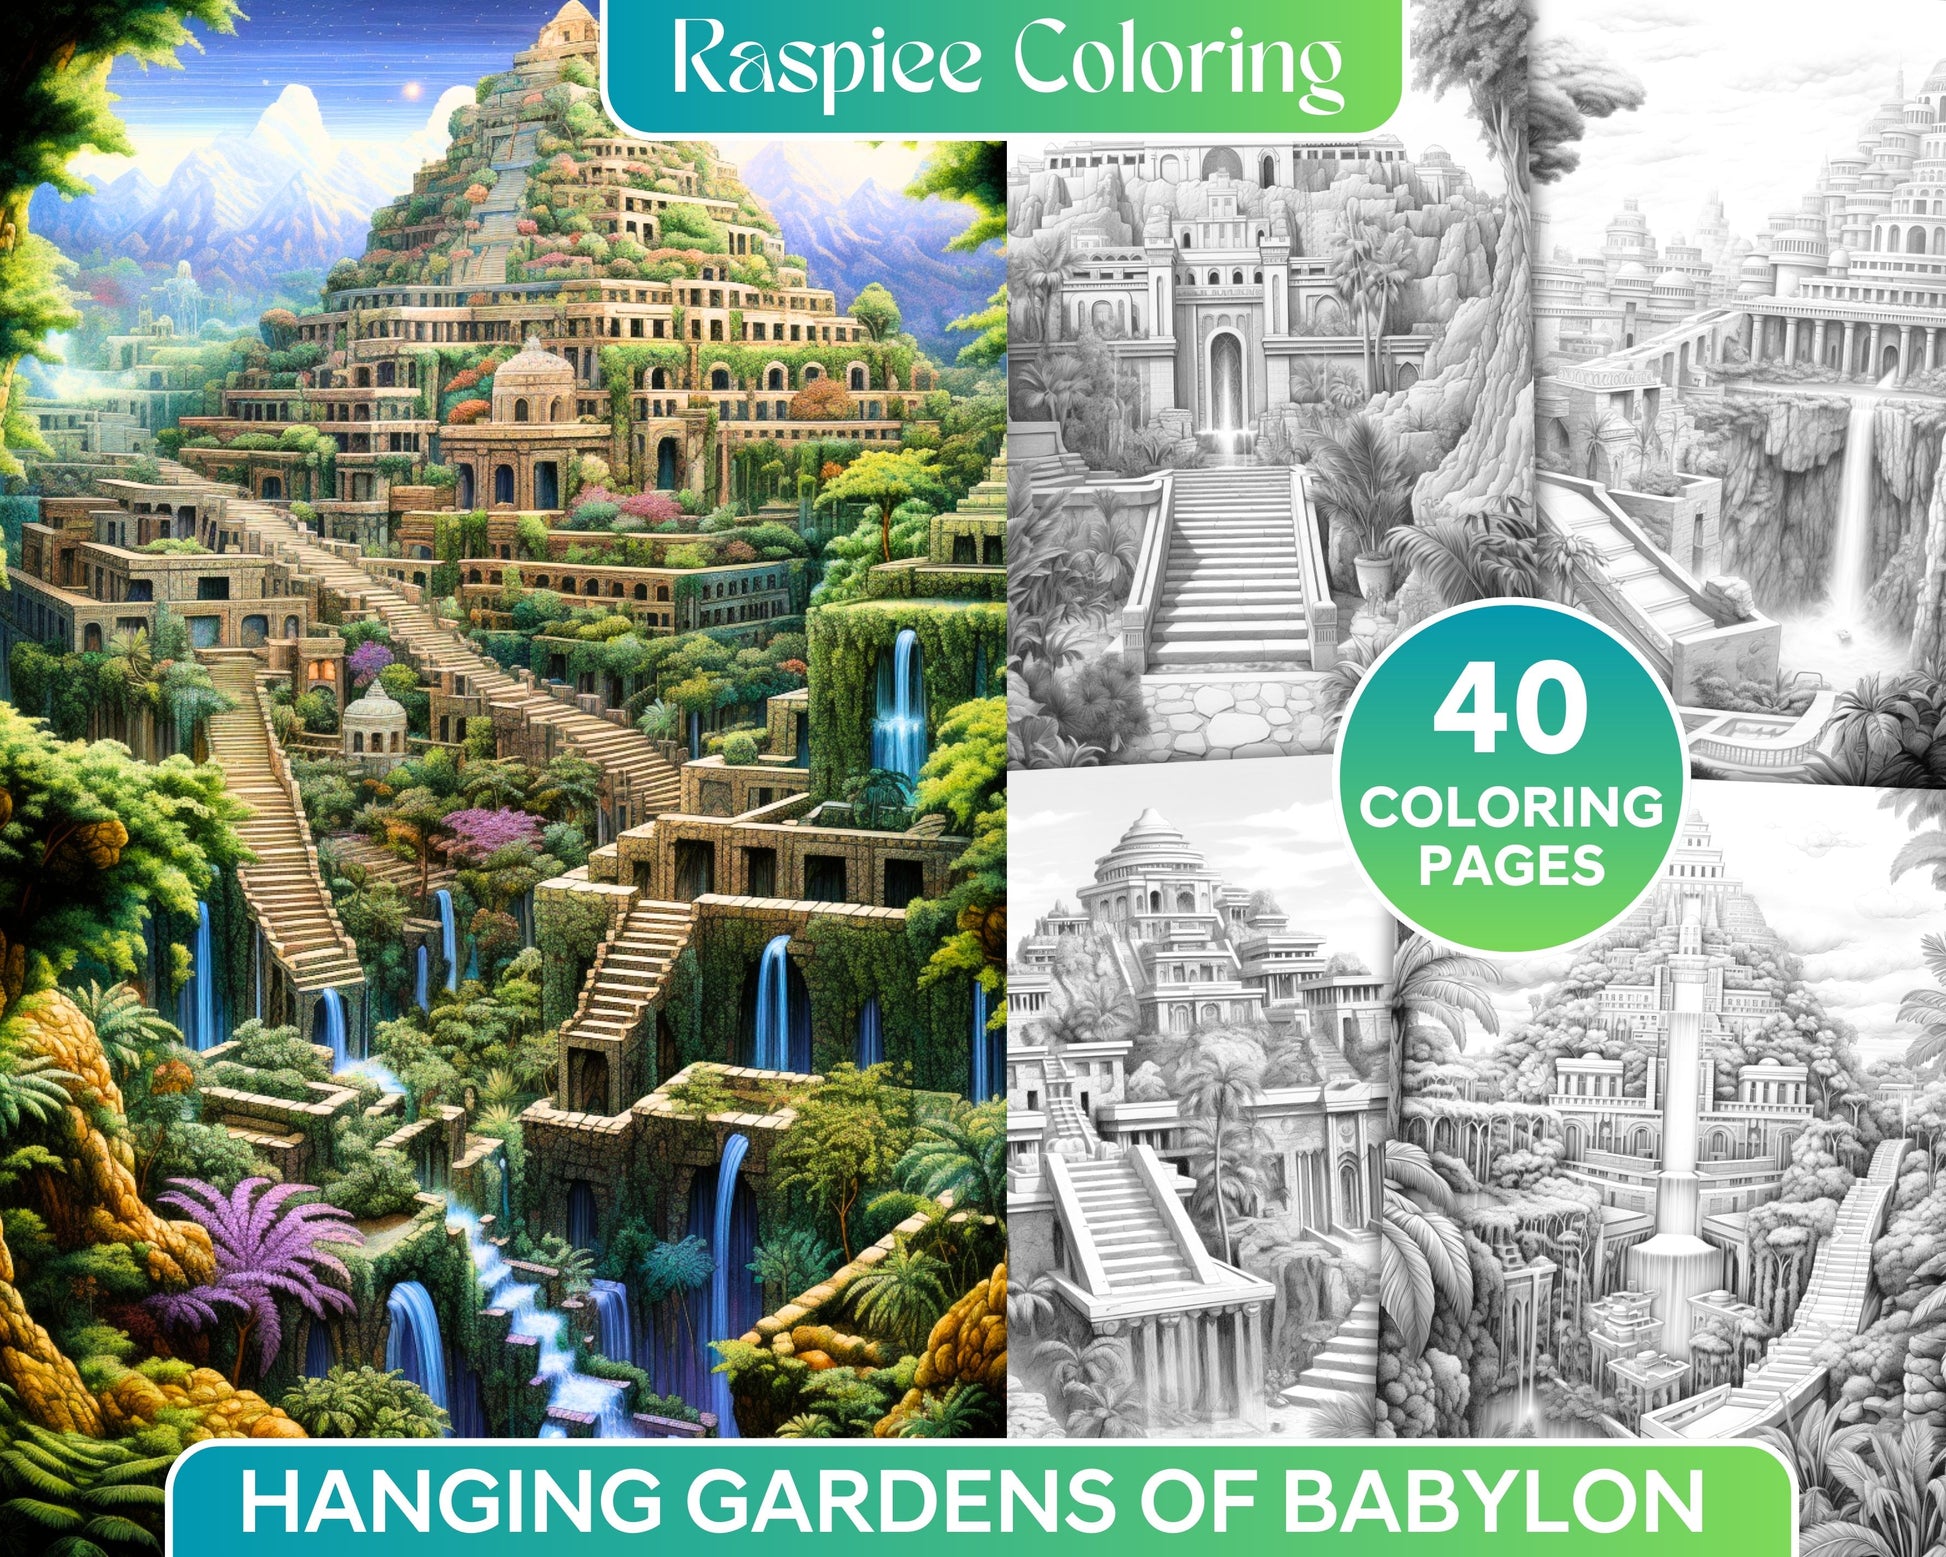 Hanging Gardens of Babylon Grayscale Coloring Pages, Printable Garden Coloring Sheets, Adult Coloring Stress Relief Book, DIY Instant Download Art